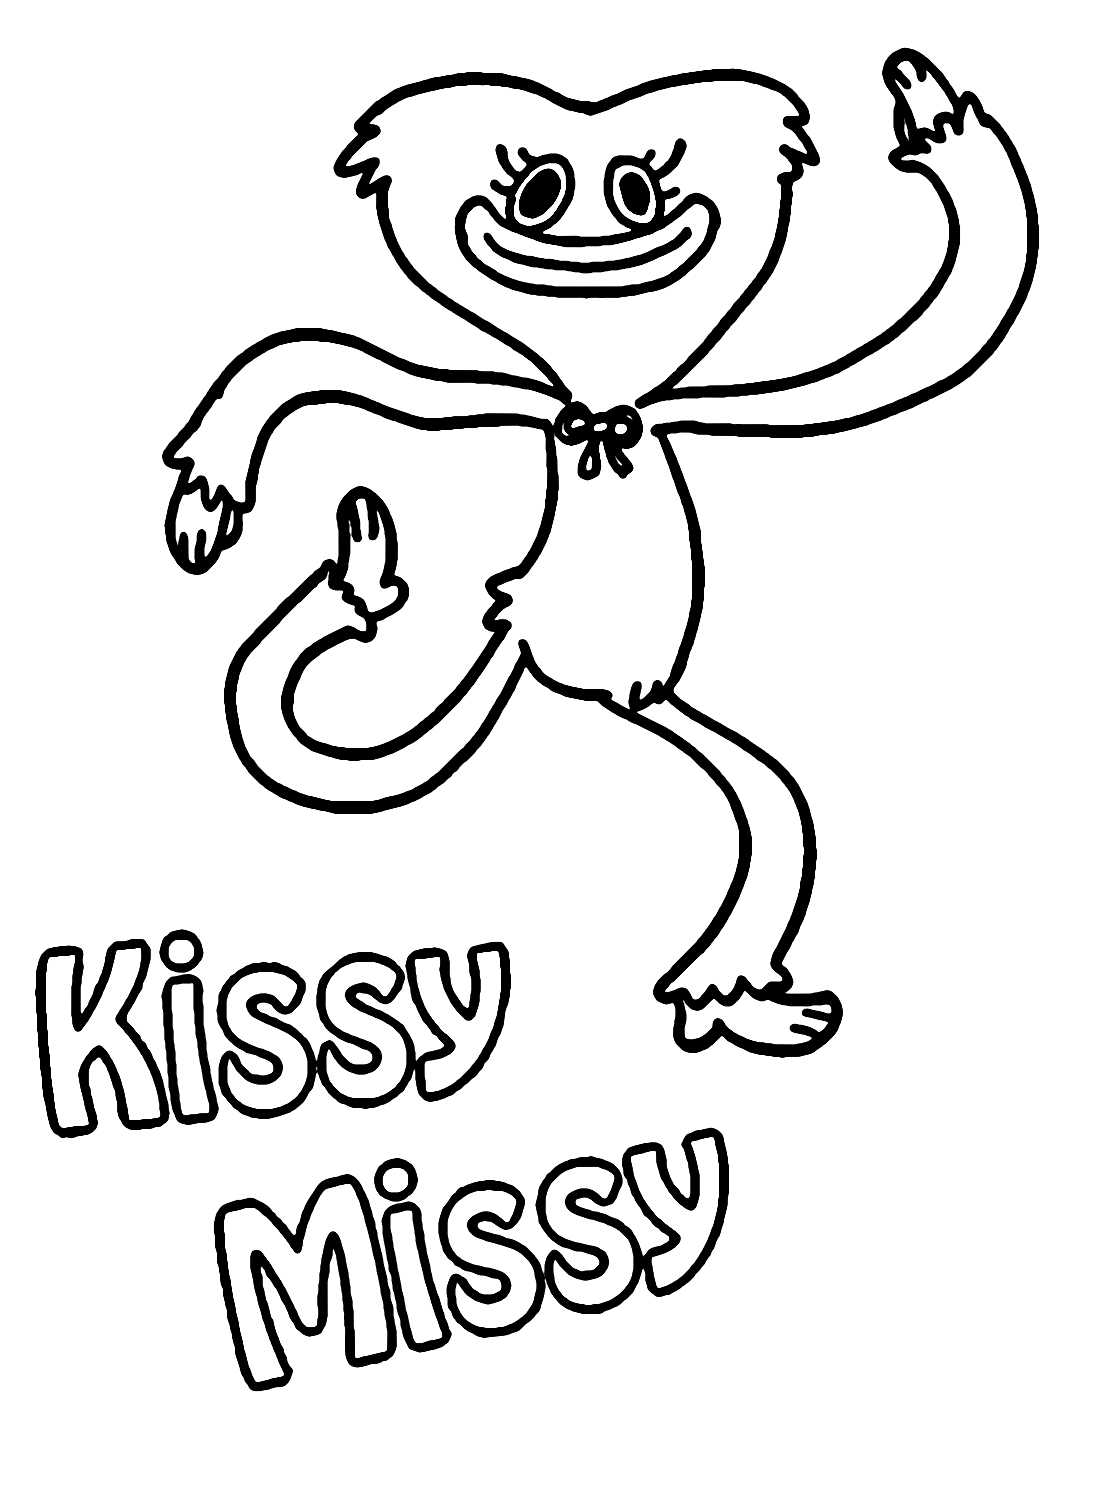 Funny Kissy Missy Coloring Page